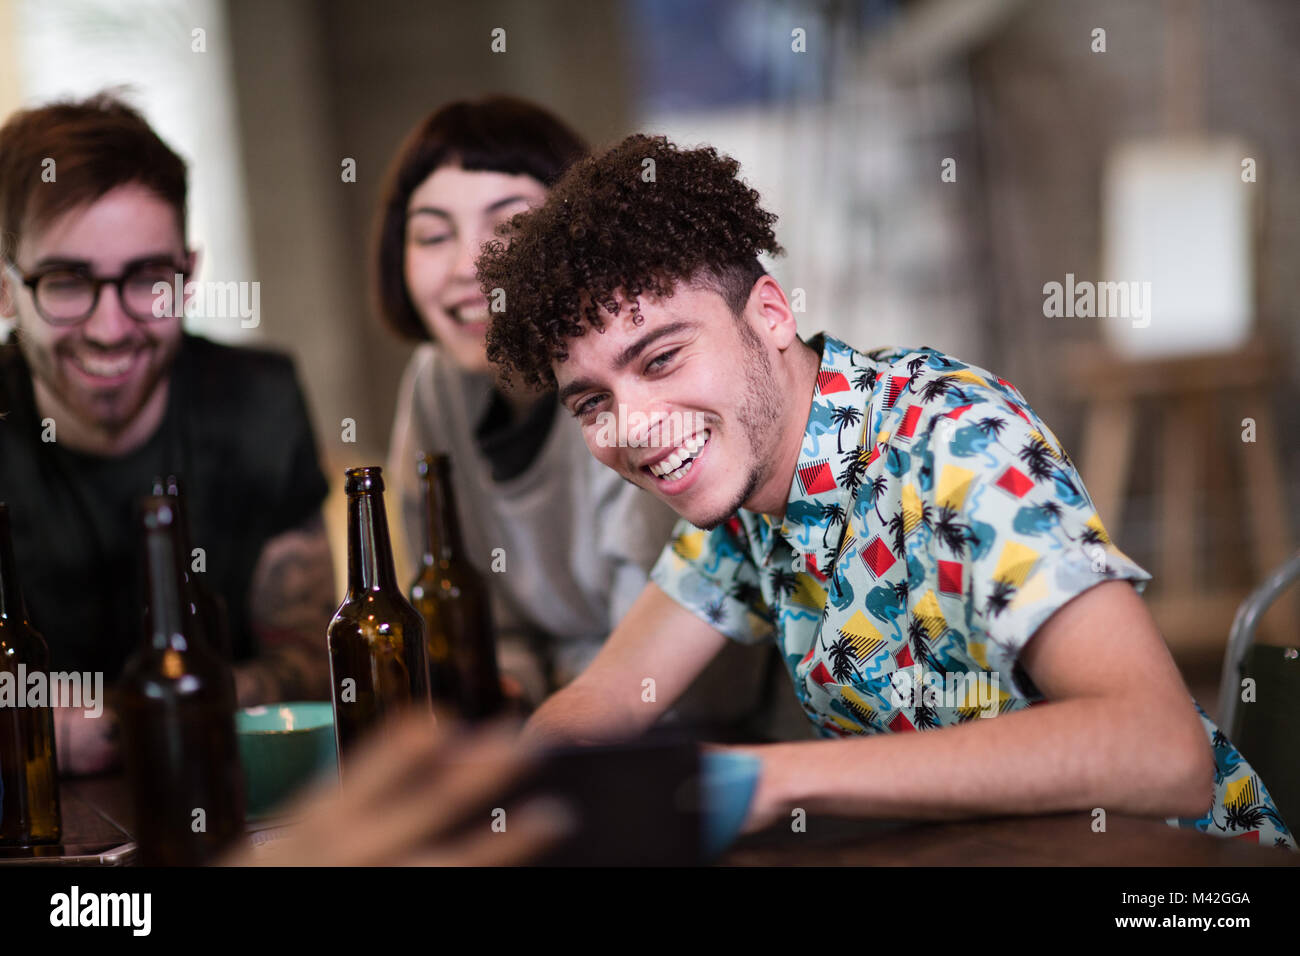 Group of friends looking at a smartphone together in a pub Stock Photo